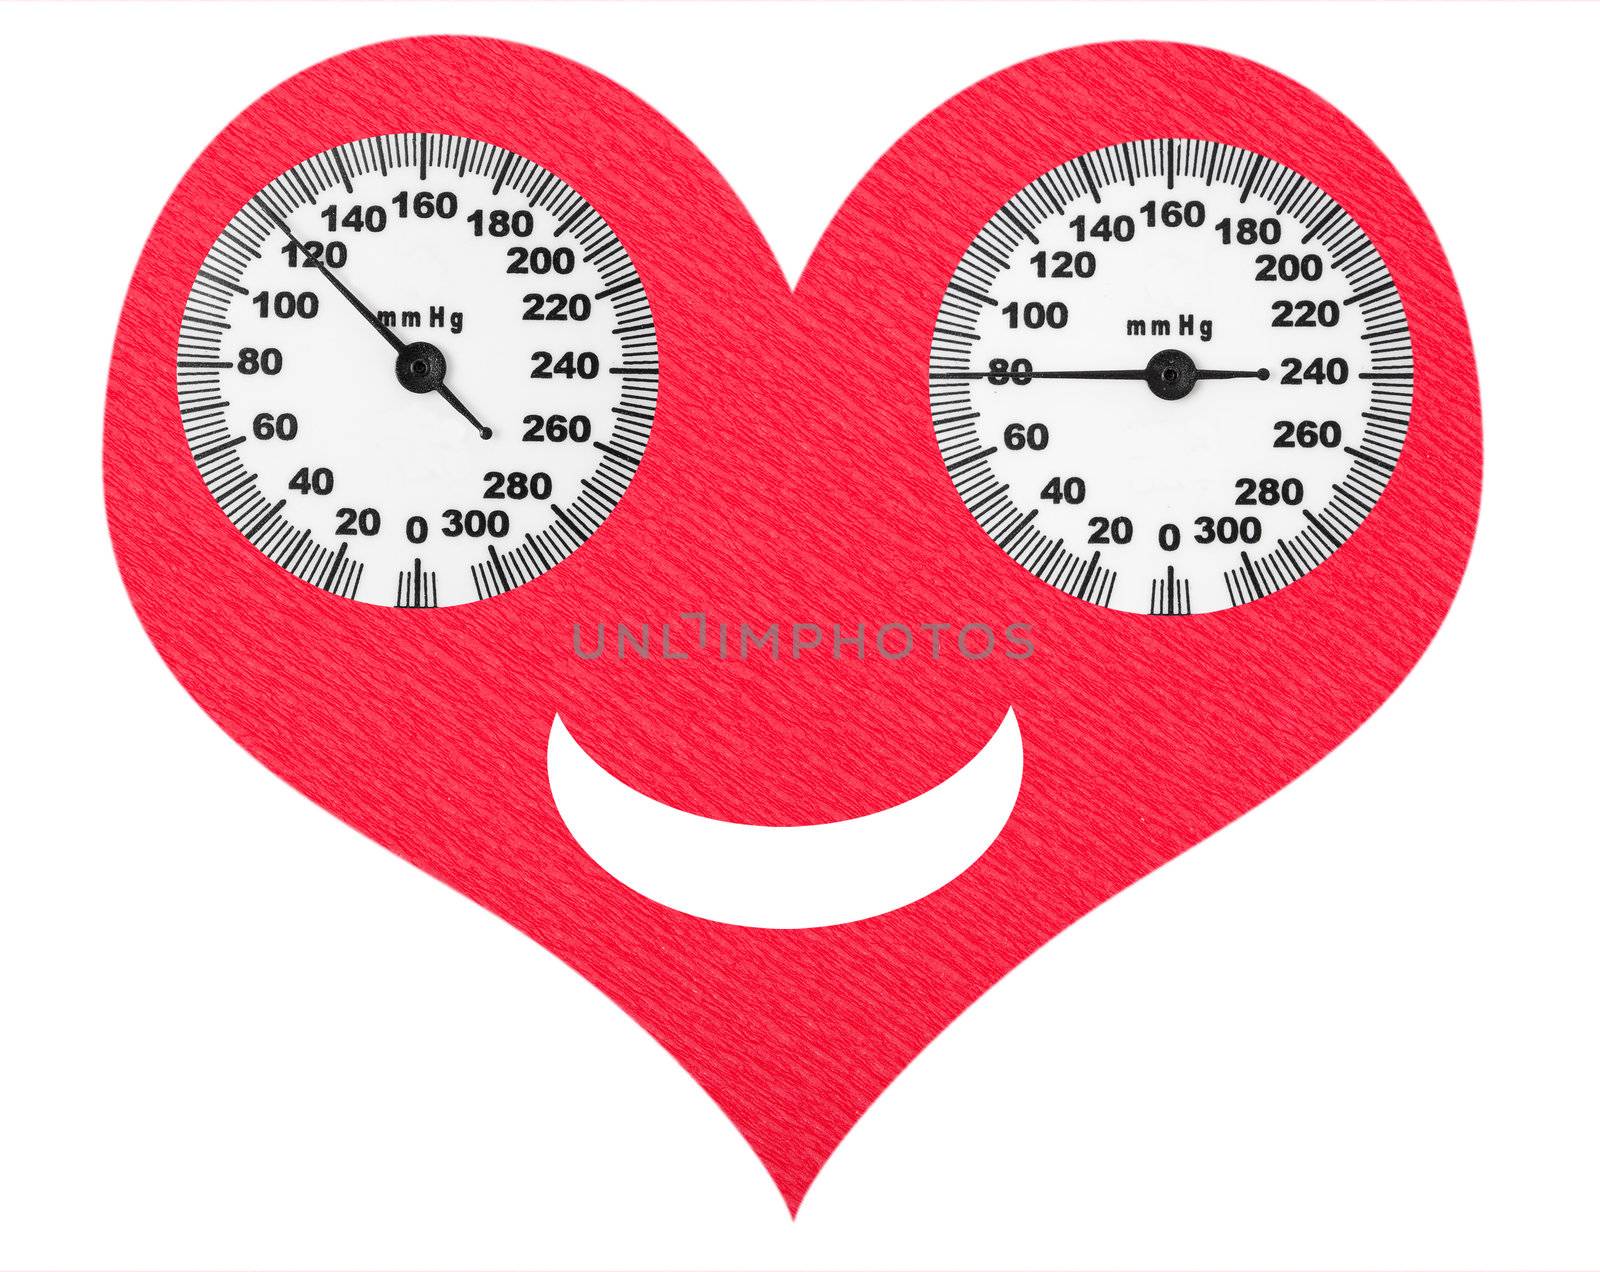 Happy heart and normal blood pressure on the scales by SeDmi